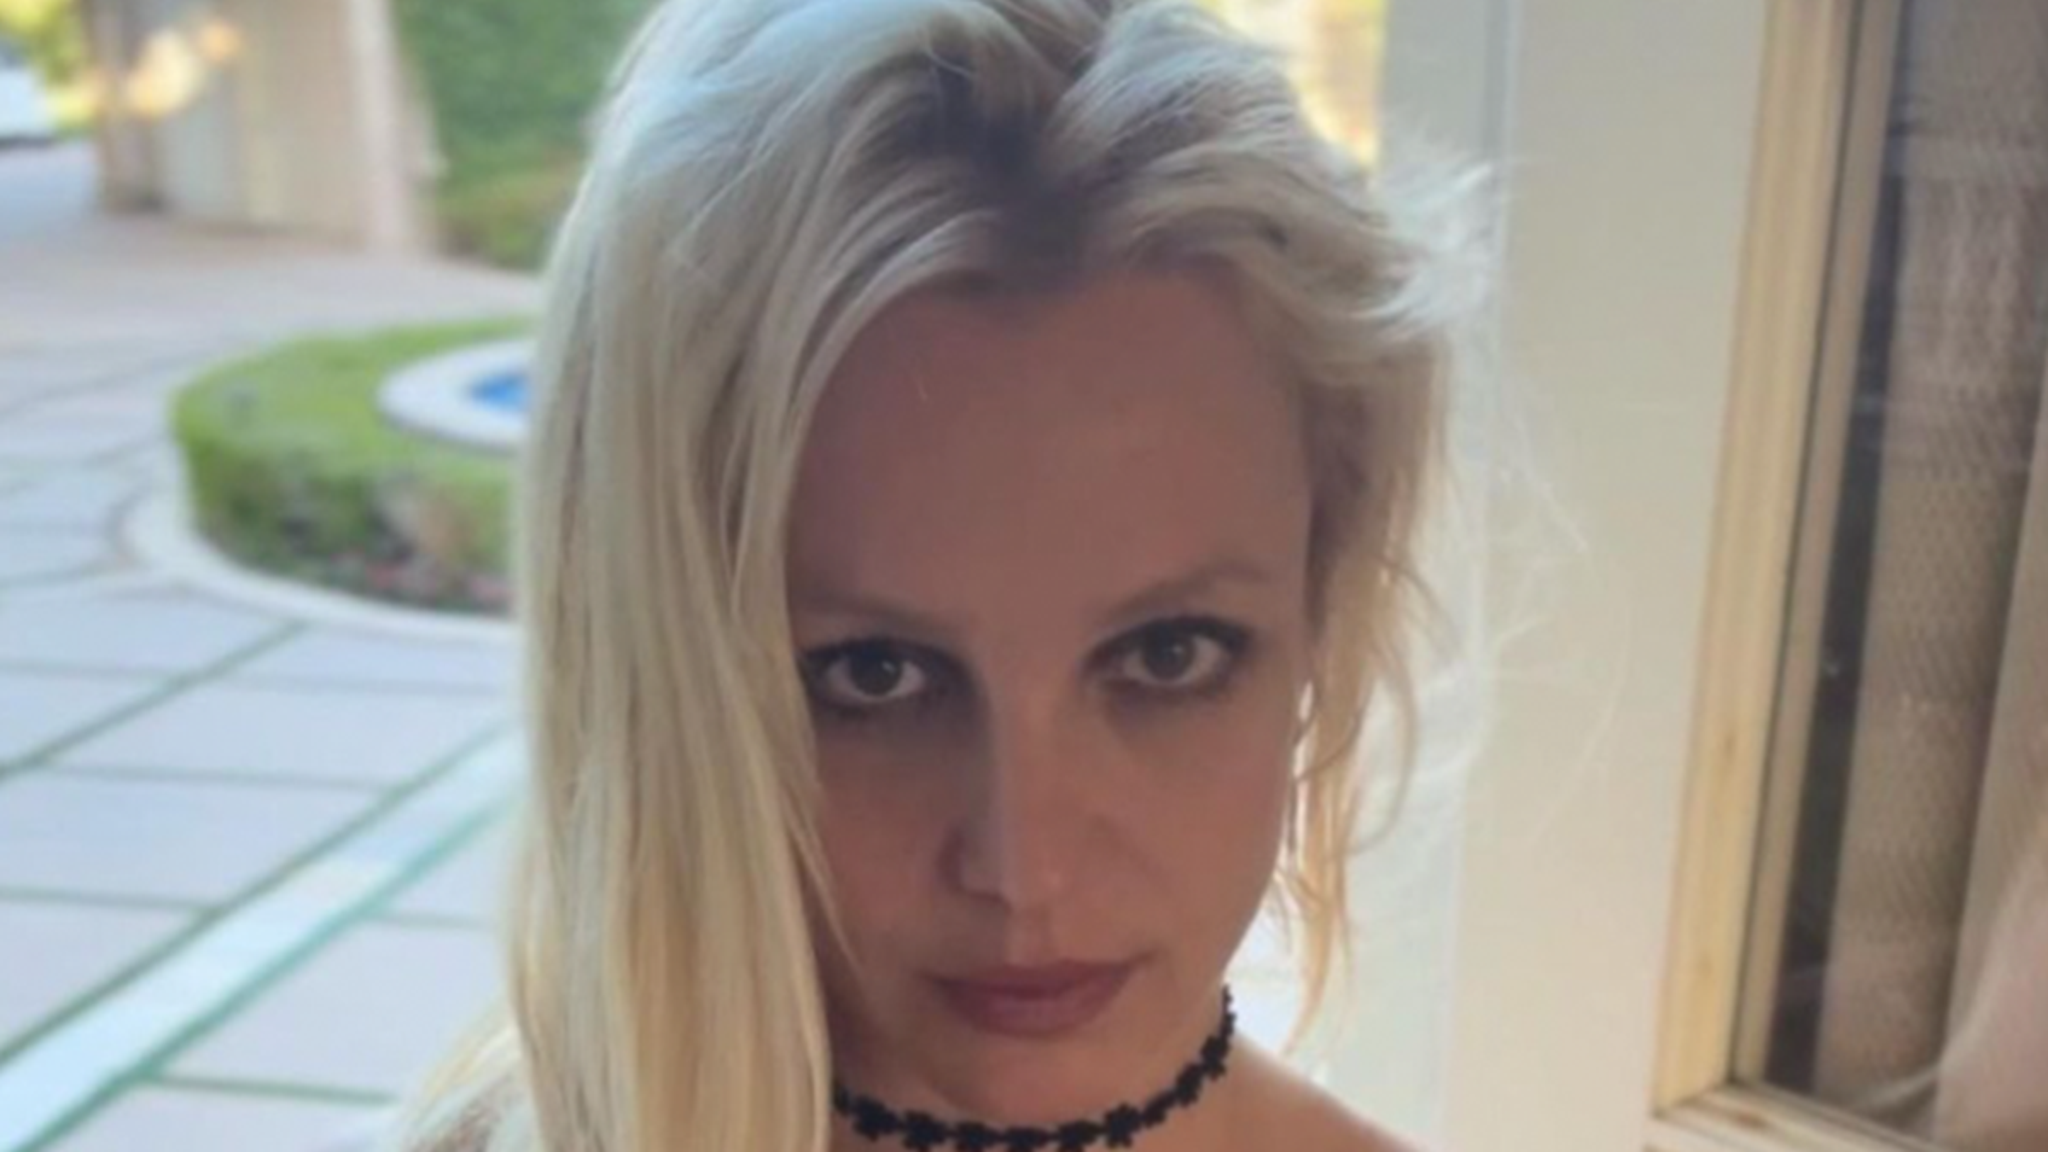 Britney Spears is ‘Completely Dysfunctional’ and In Danger of Going Broke